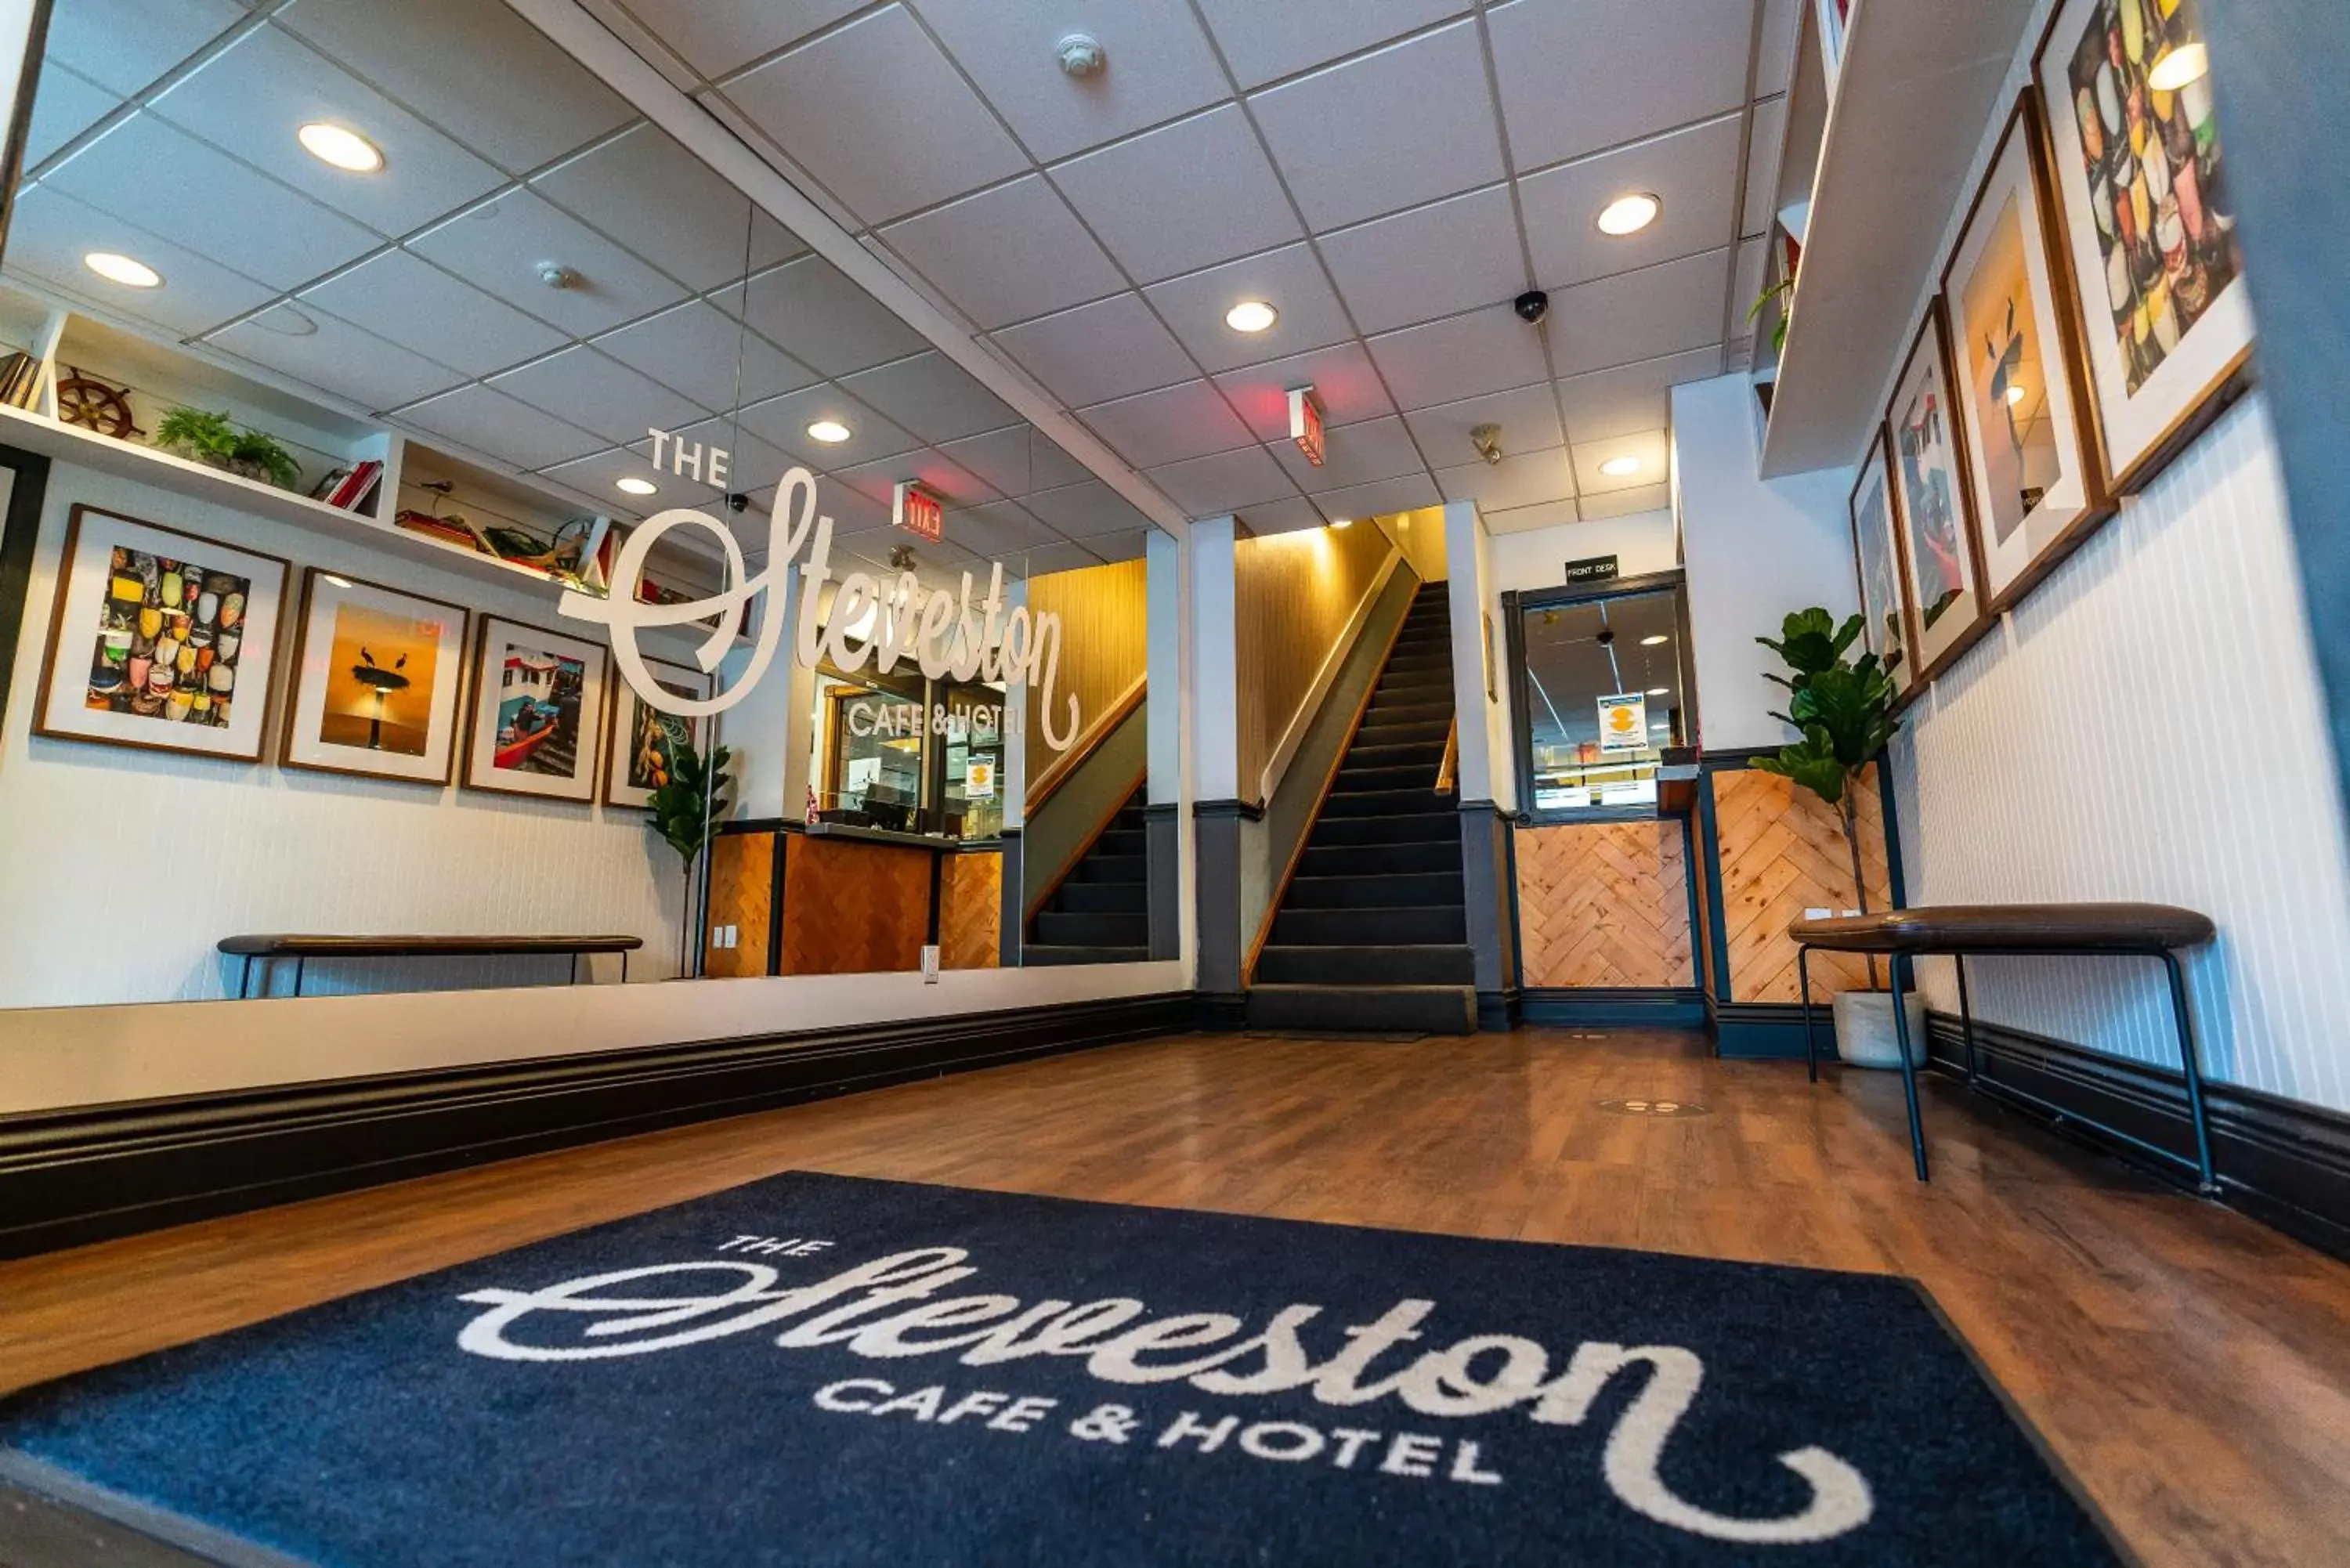 Lobby or reception in The Steveston Cafe & Hotel